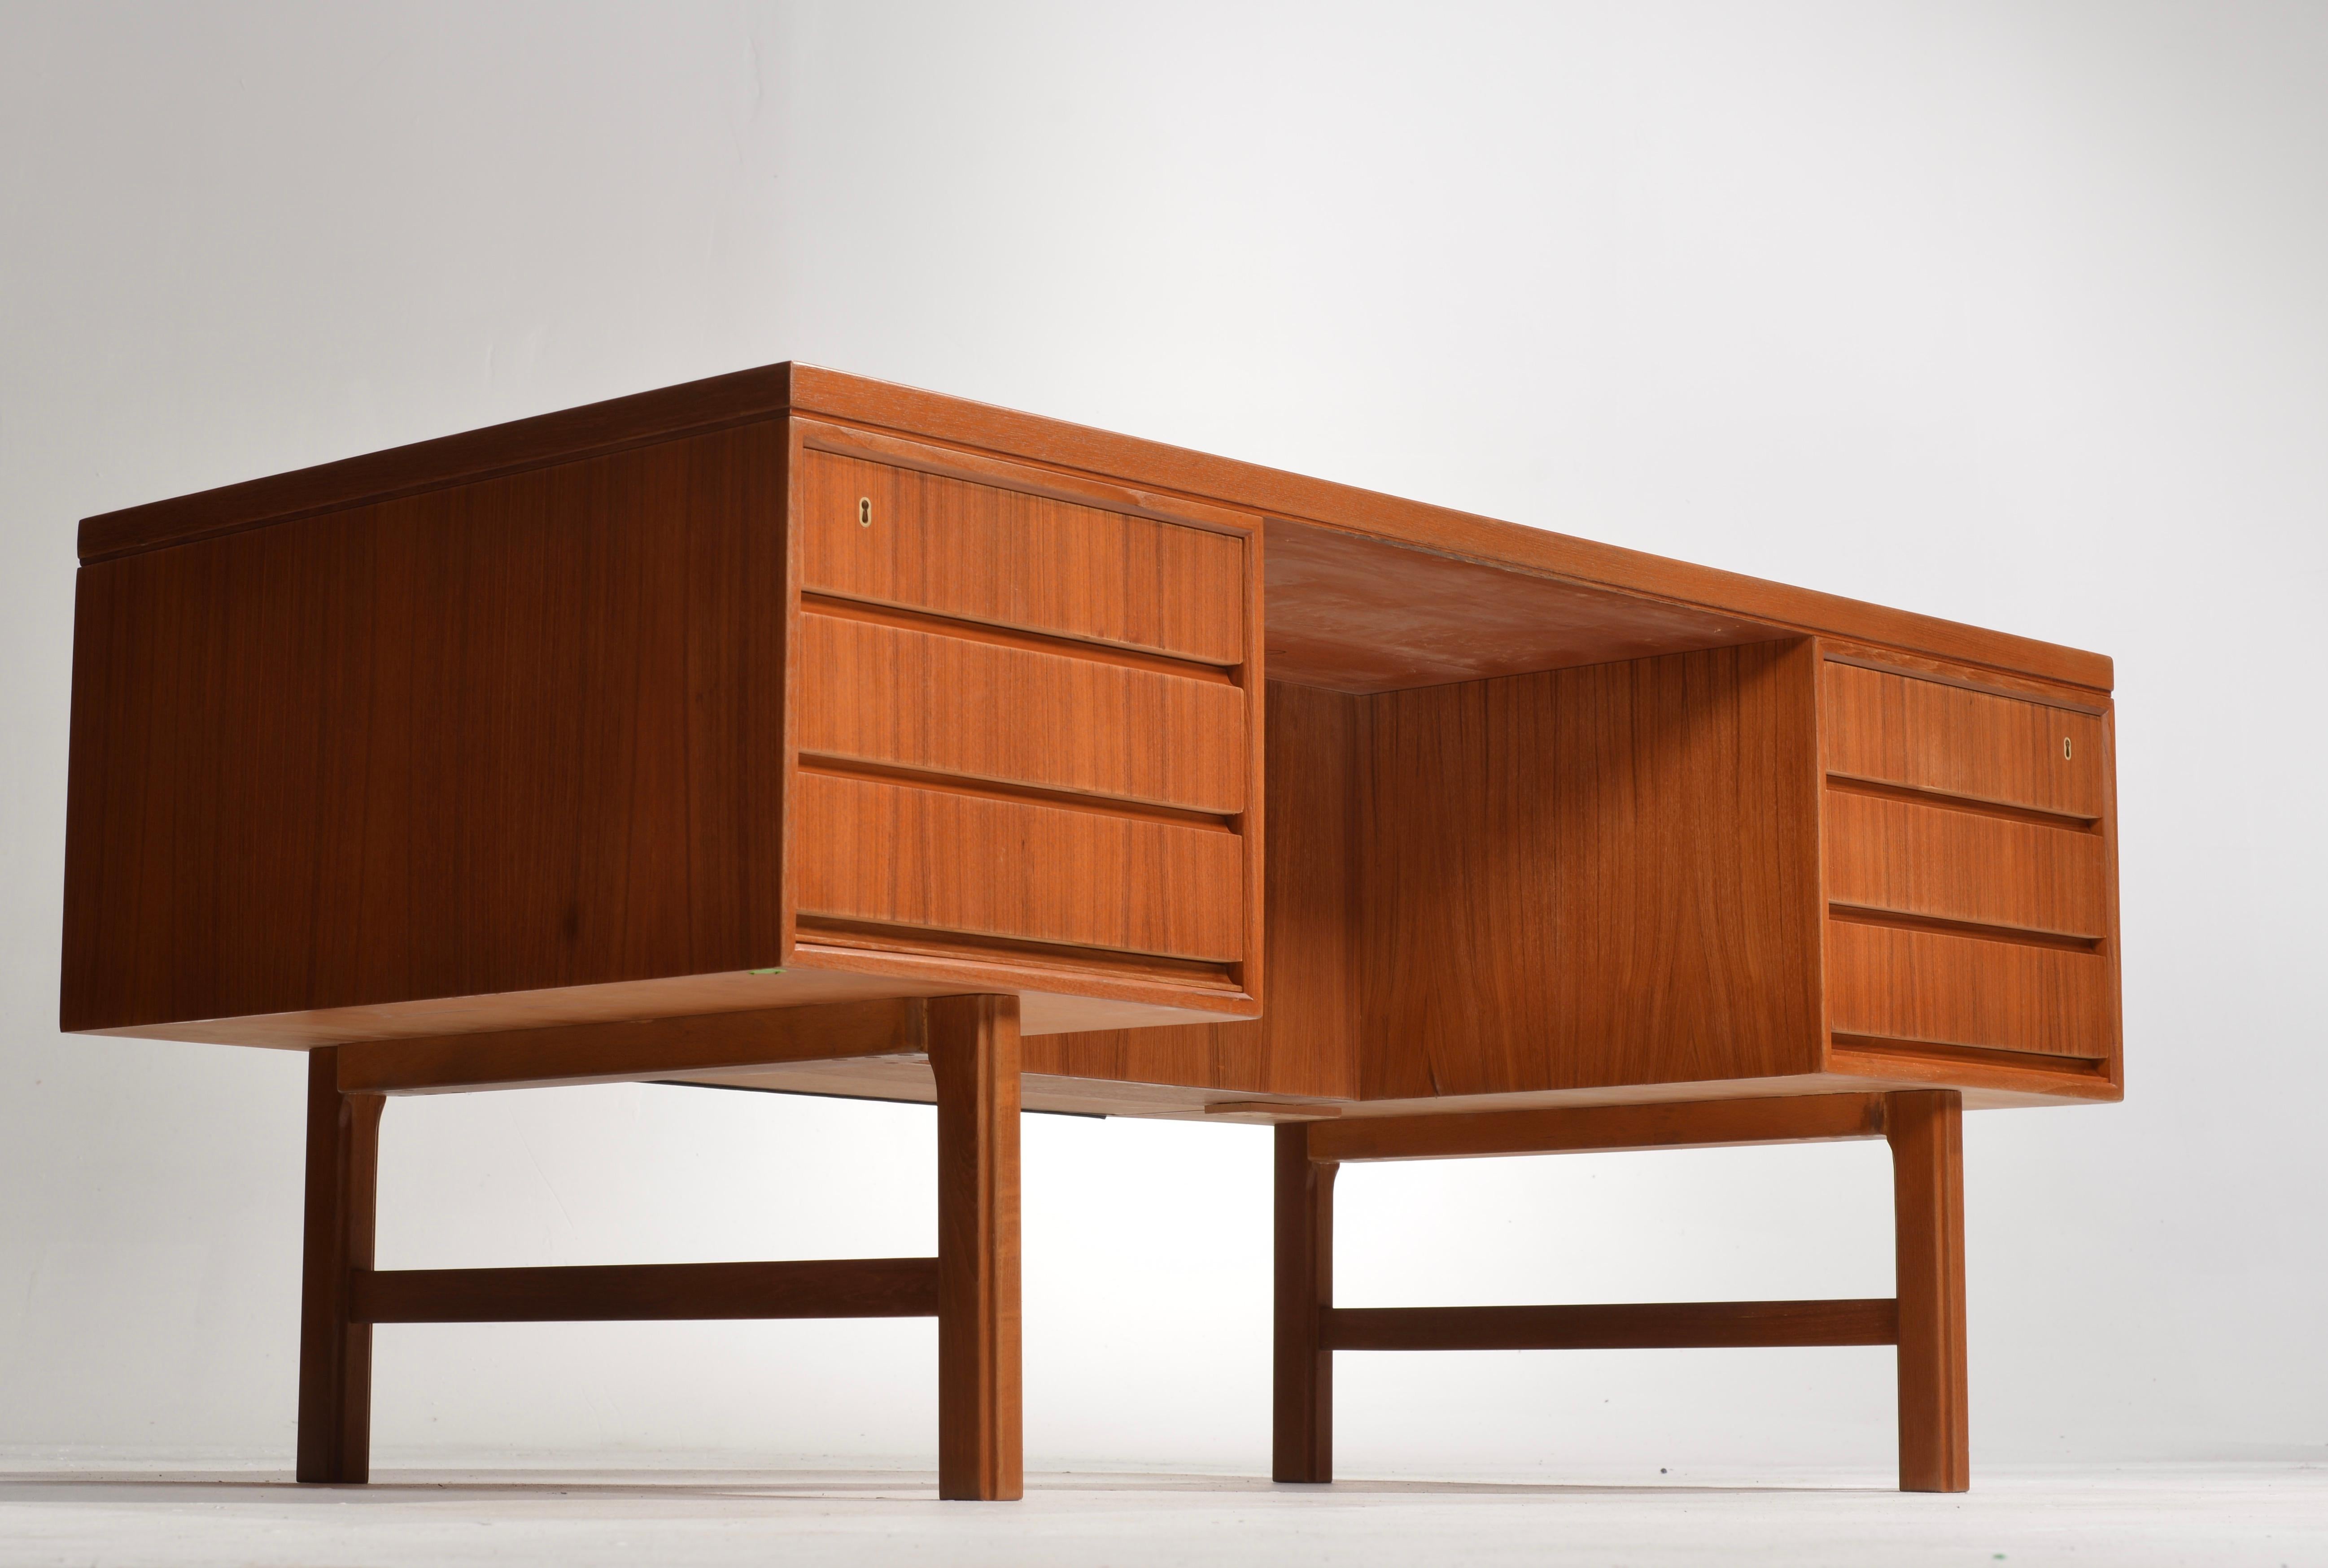 The Omann Jun Executive Desk is the perfect addition to any modern office. This mid-century Danish modern teak desk features a sleek silhouette and a timeless design that will blend with any office décor. The solid teak construction ensures